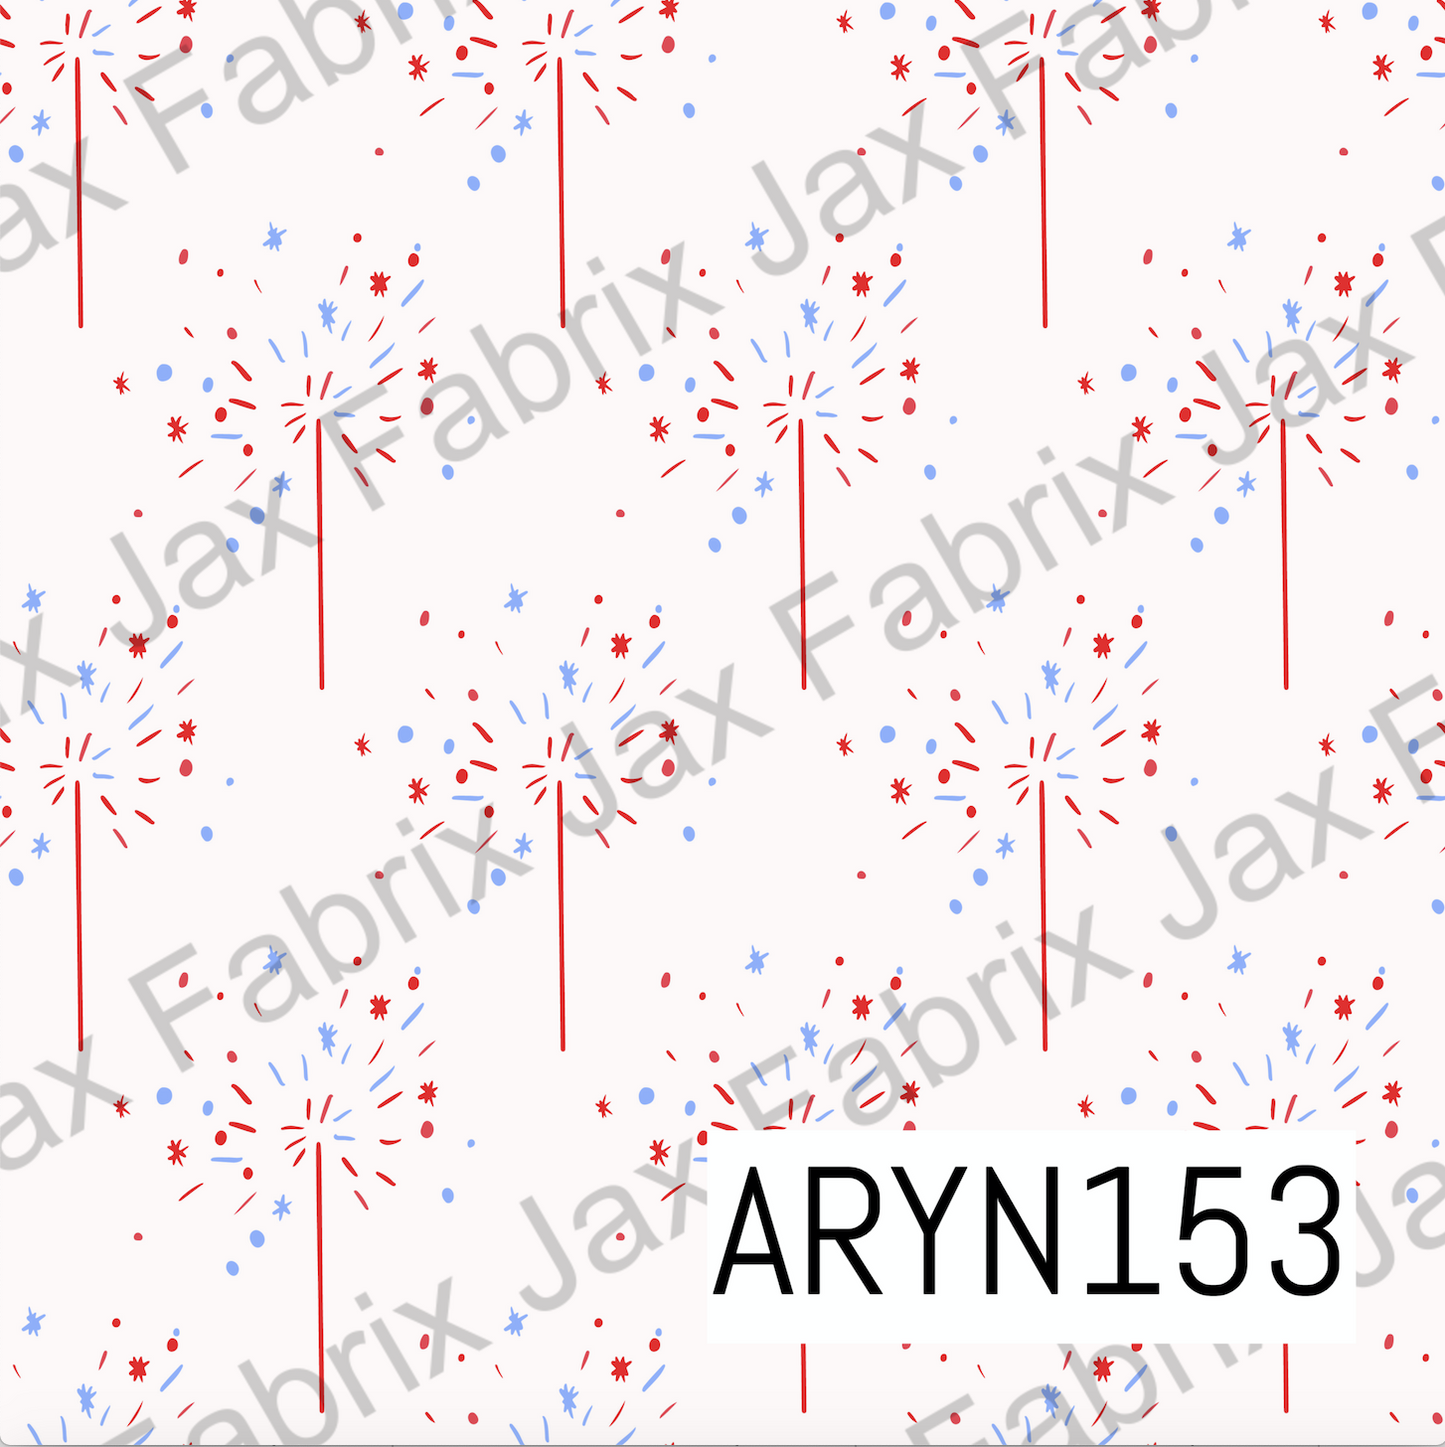 Sparklers Red White and Blue ARYN153